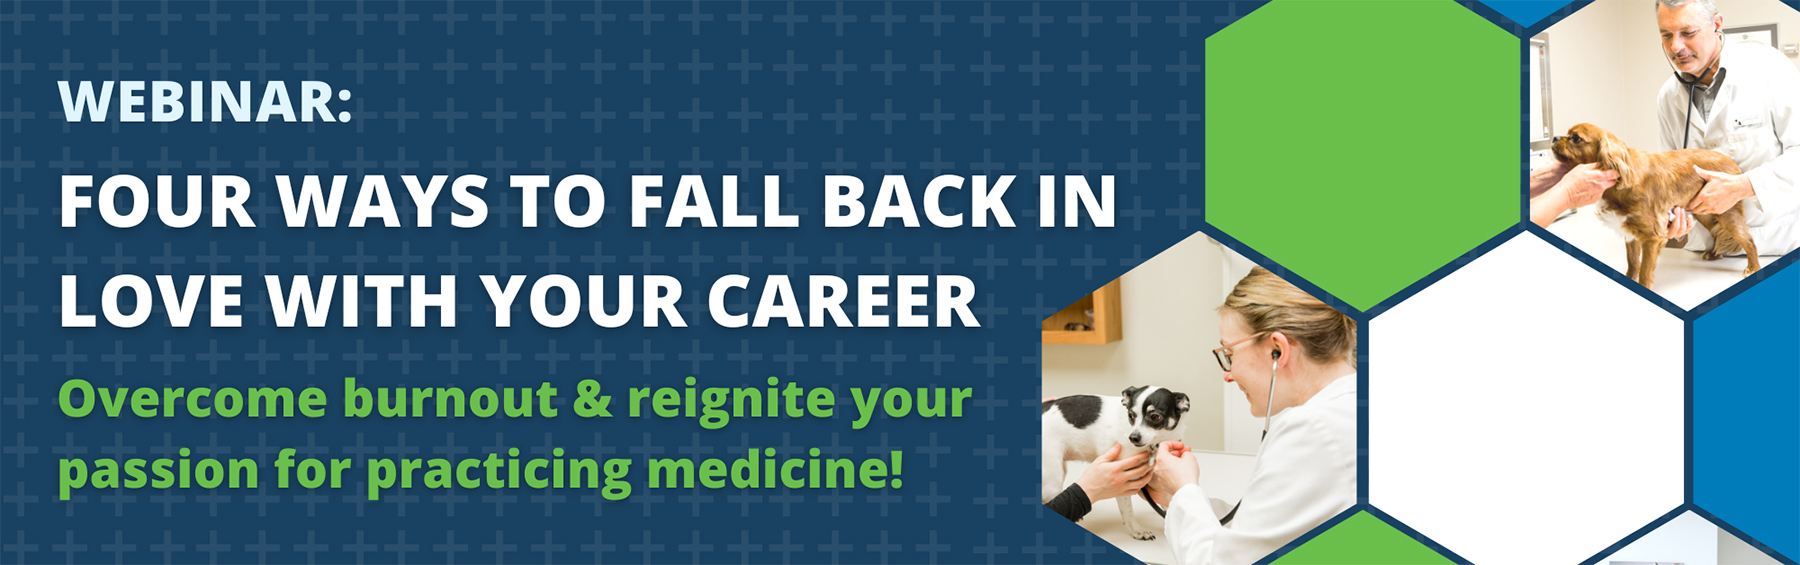 Webinar: Four ways to fall back in love with your career! Overcome burnout and reignite your passion for practicing medicine!